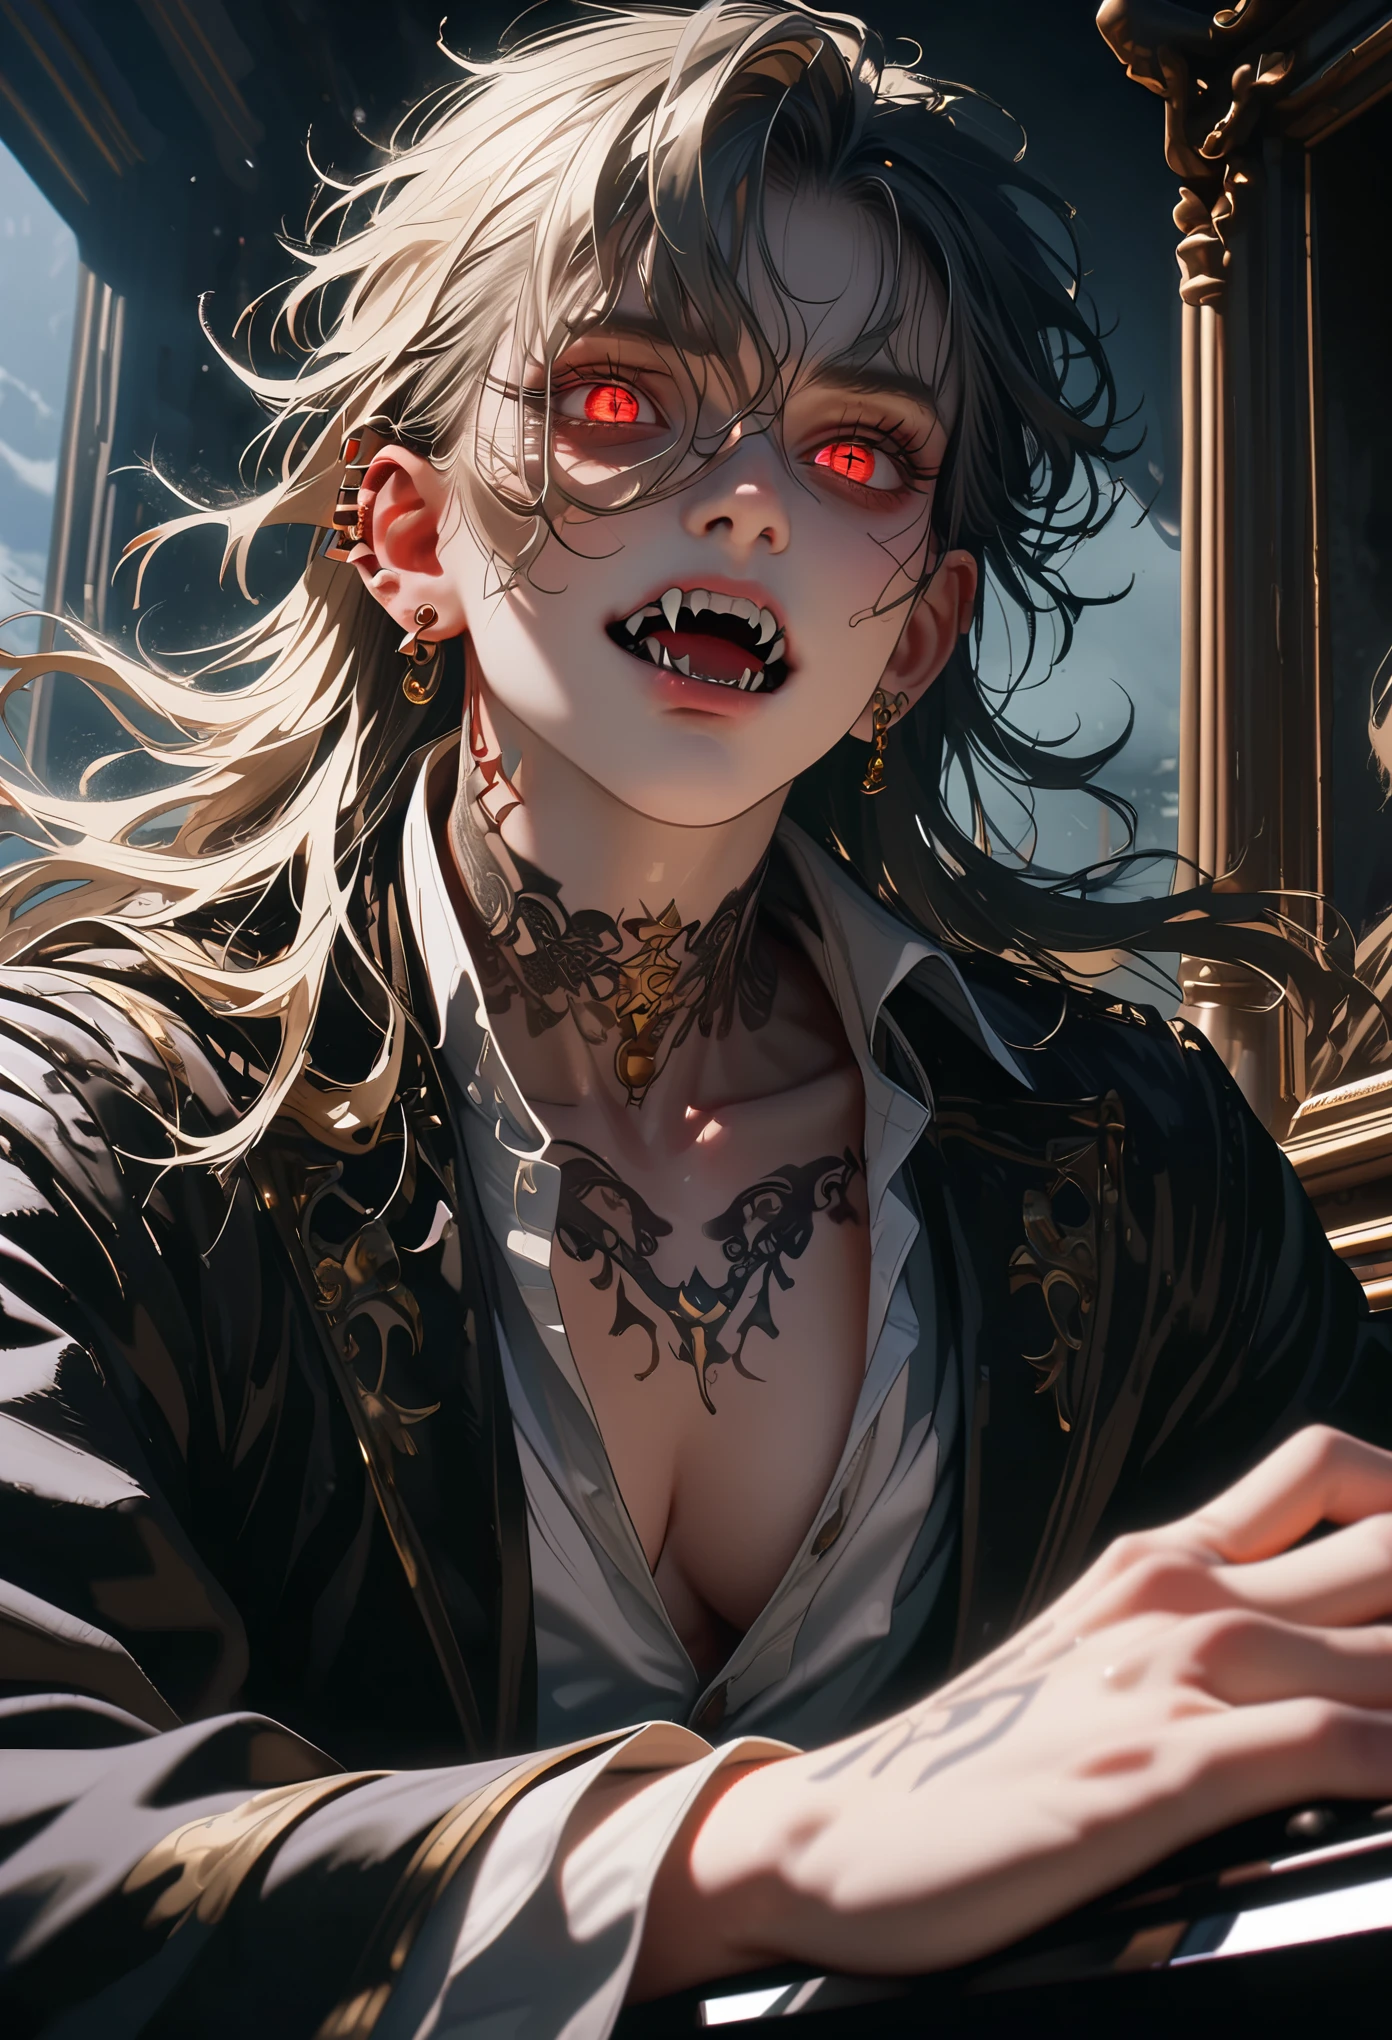 (8K, RAW photos, Best quality, tmasterpiece: 1.4))), (((The man who plays the piano)))，ultra high resolution, ultra - detailed, lamplight, Close-up cleavage, Handsome men, red eyes, (detailed eyes, The eyes are bright:1.2), Black medium long hair, Vampires, pale-skinned, ear piercings, Dark, Blackn clothes, Meticulous clothes, gold accessories on clothes, Sharp fangs, (perfect anatomia:1.2), Highqualityshadow, natural lightting, (White highlights:1.2), natta, overcast day, (neck tattoos:1.2), (starrysky:1.2)